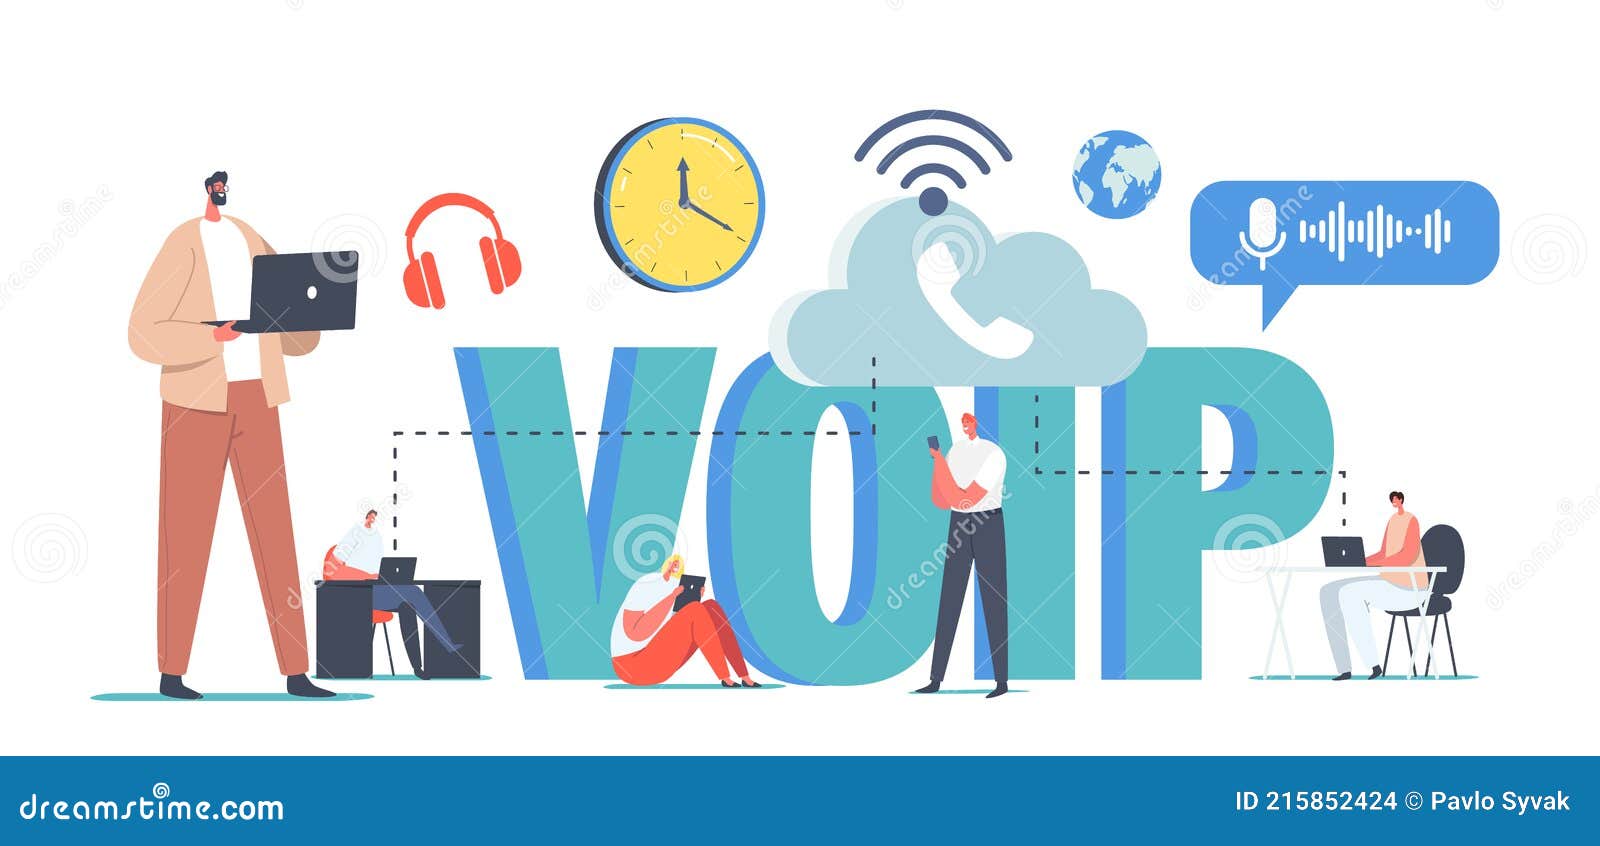 voip technology, voice over ip concept. characters use telephony, telecommunication system, telephone communication